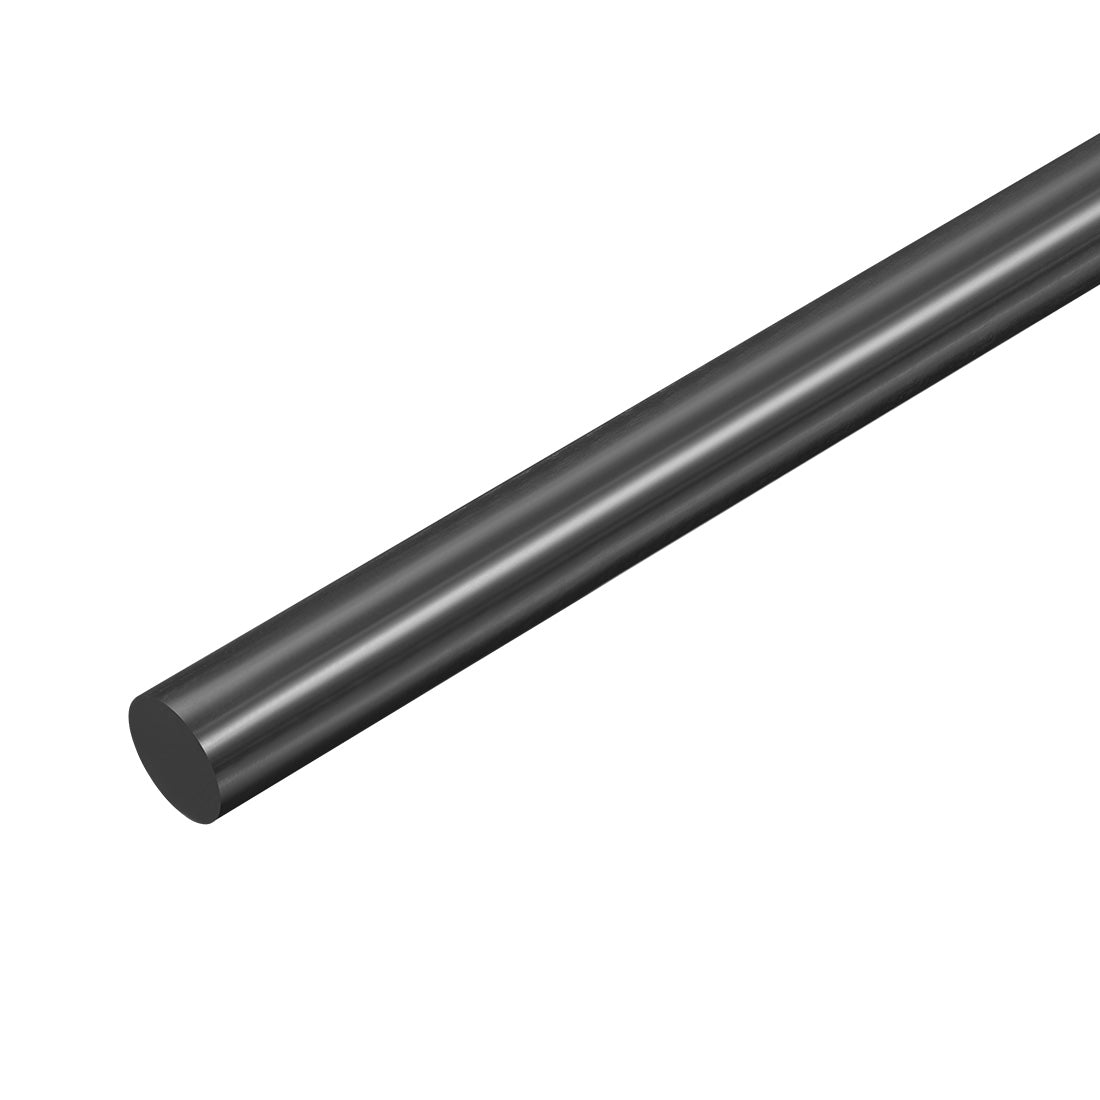 uxcell Uxcell Plastic Round Rod,12mm Dia 50cm Black Engineering Plastic Round Bar